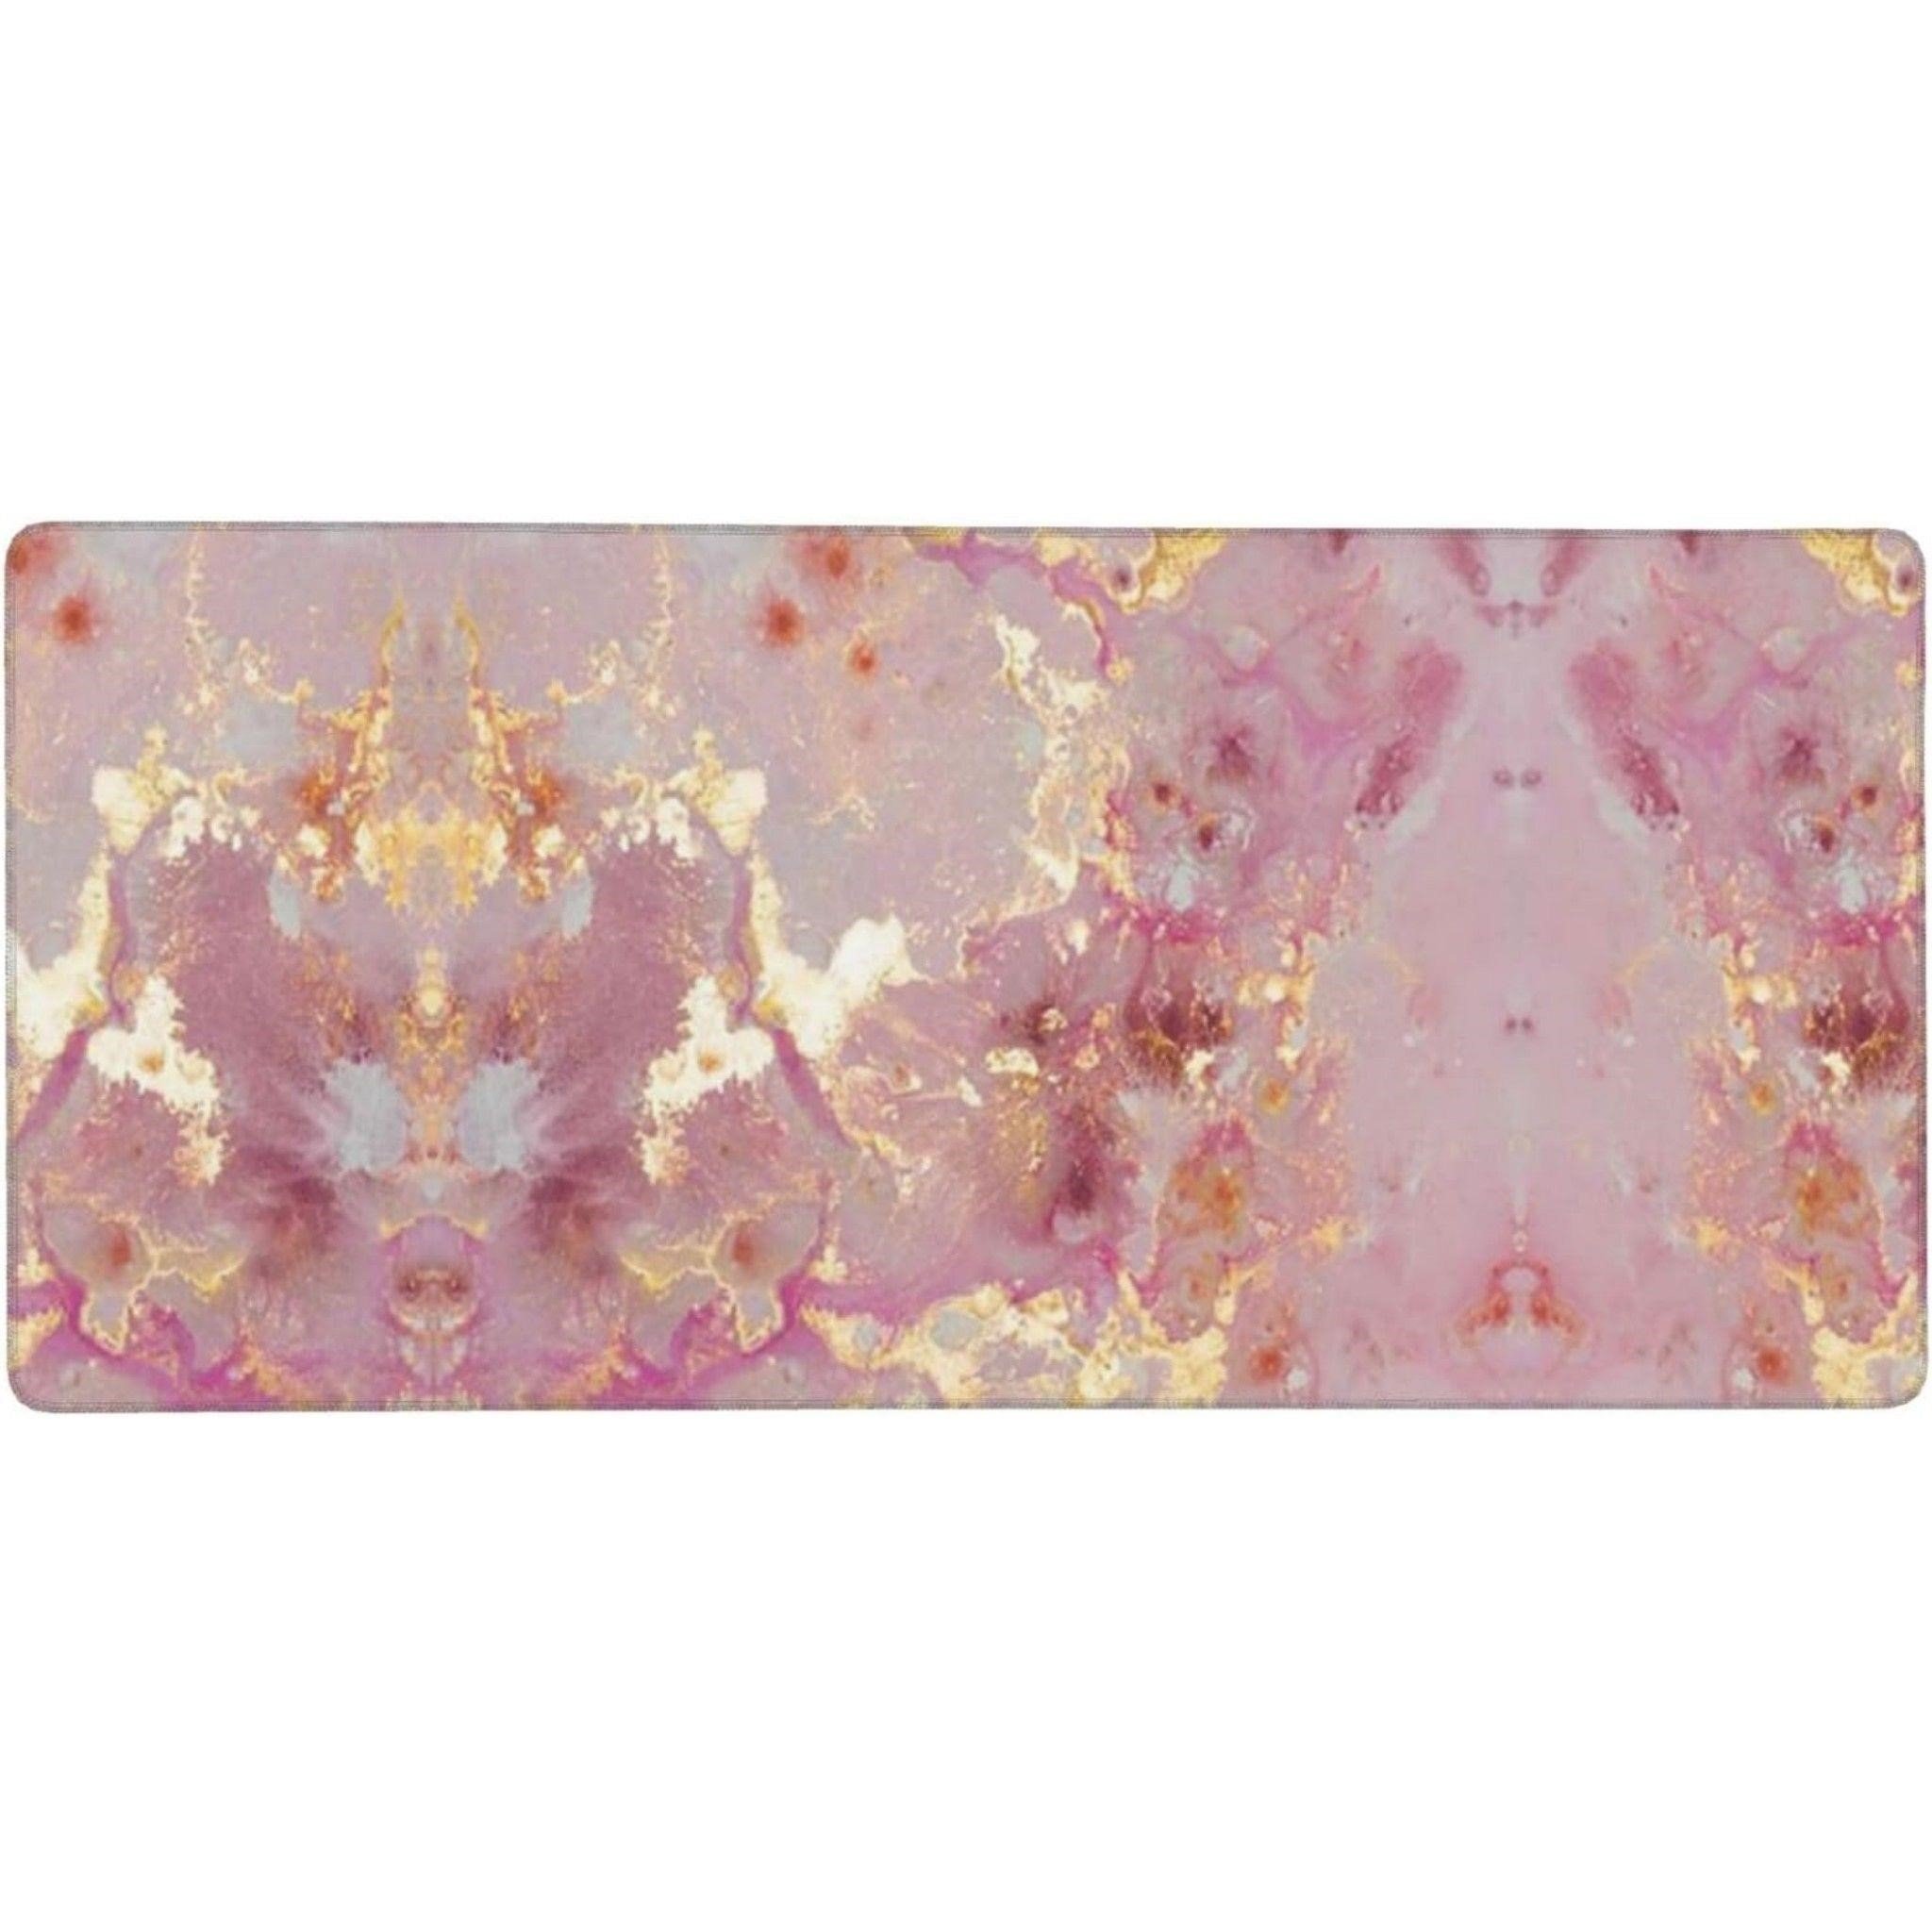 Pink Marble Texture Print Oversize Mouse Pad